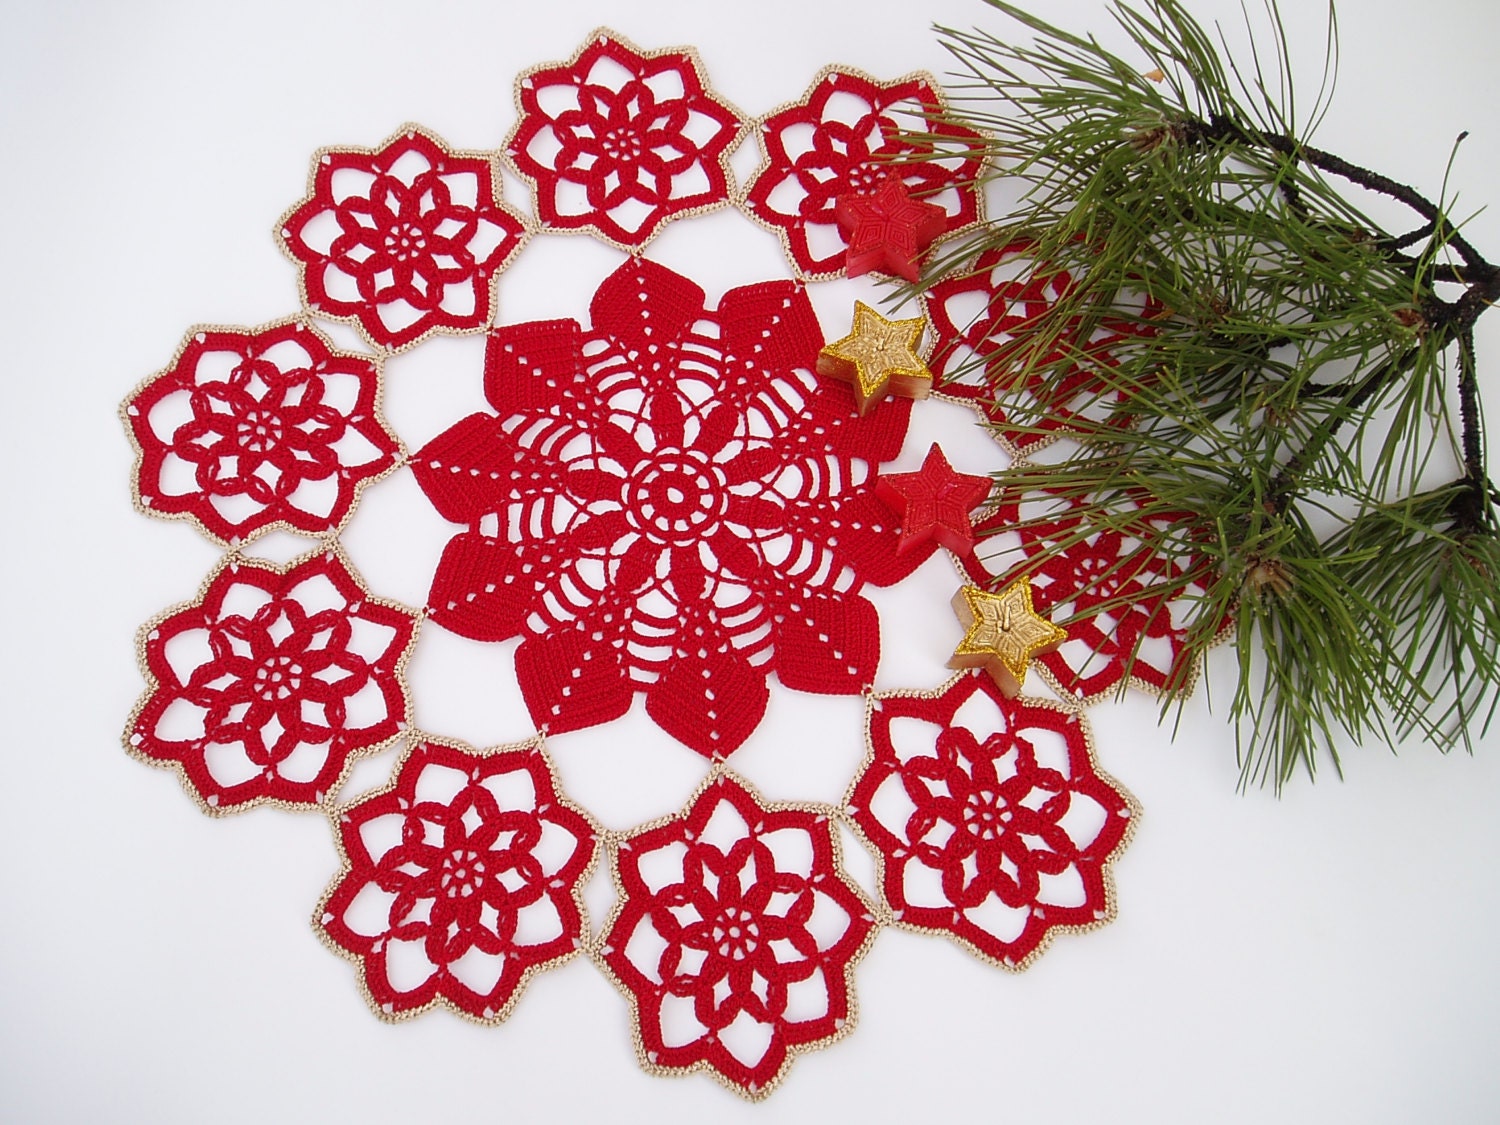 Lace Crochet Christmas Red Doily, Crochet Centerpiece, Christmas Table Decoration, Lace Crochet Red Table Decorative Cover - TaniaNeedleArt